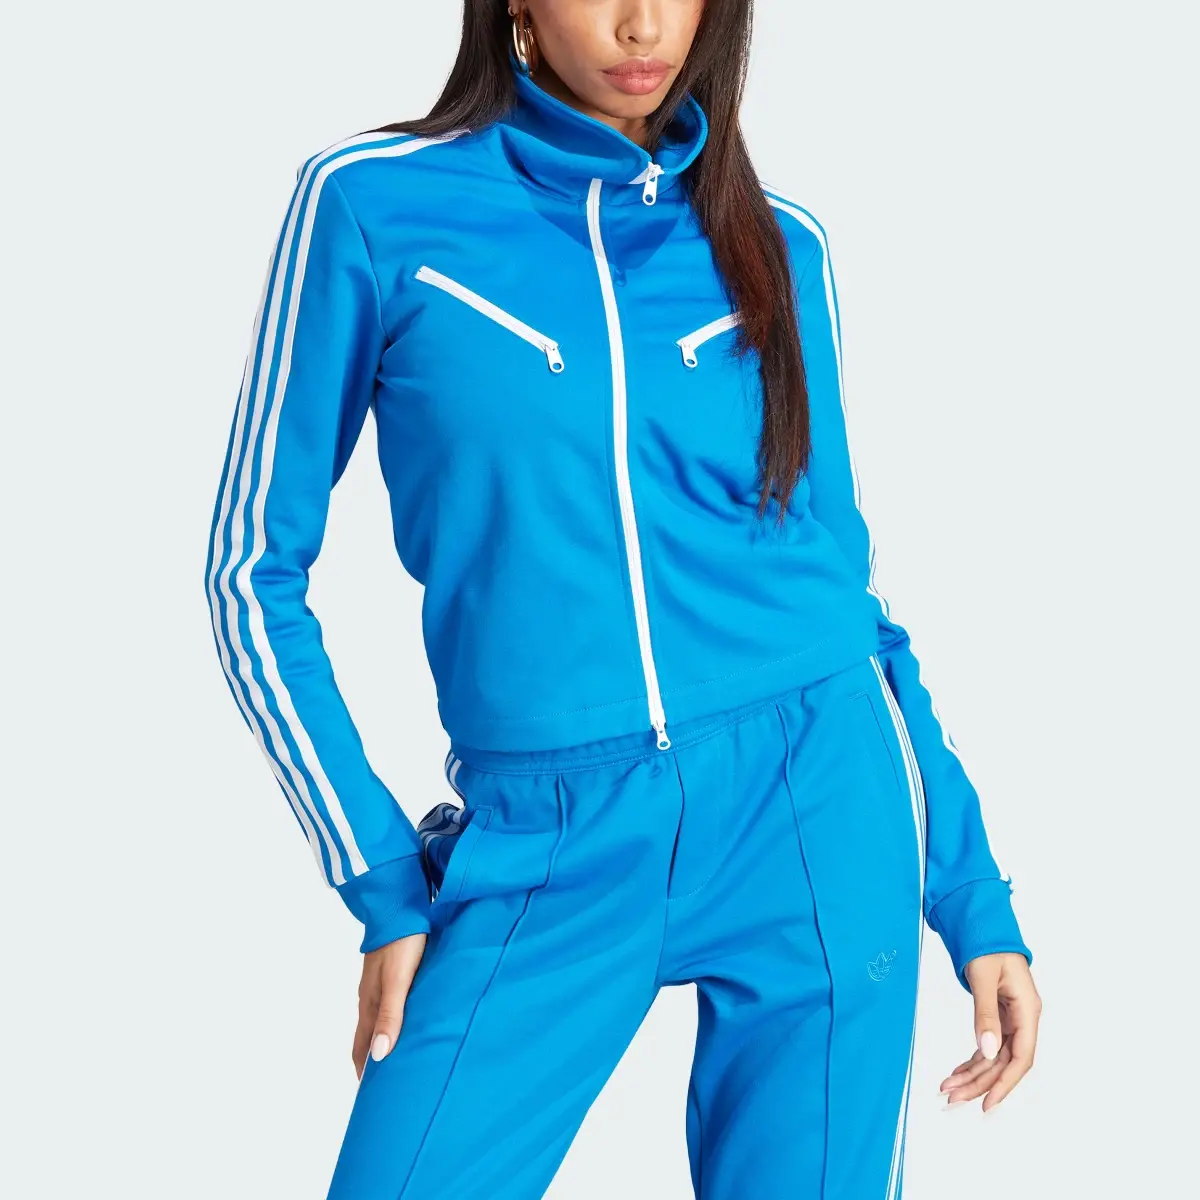 Adidas Track top Blue Version Montreal. 1